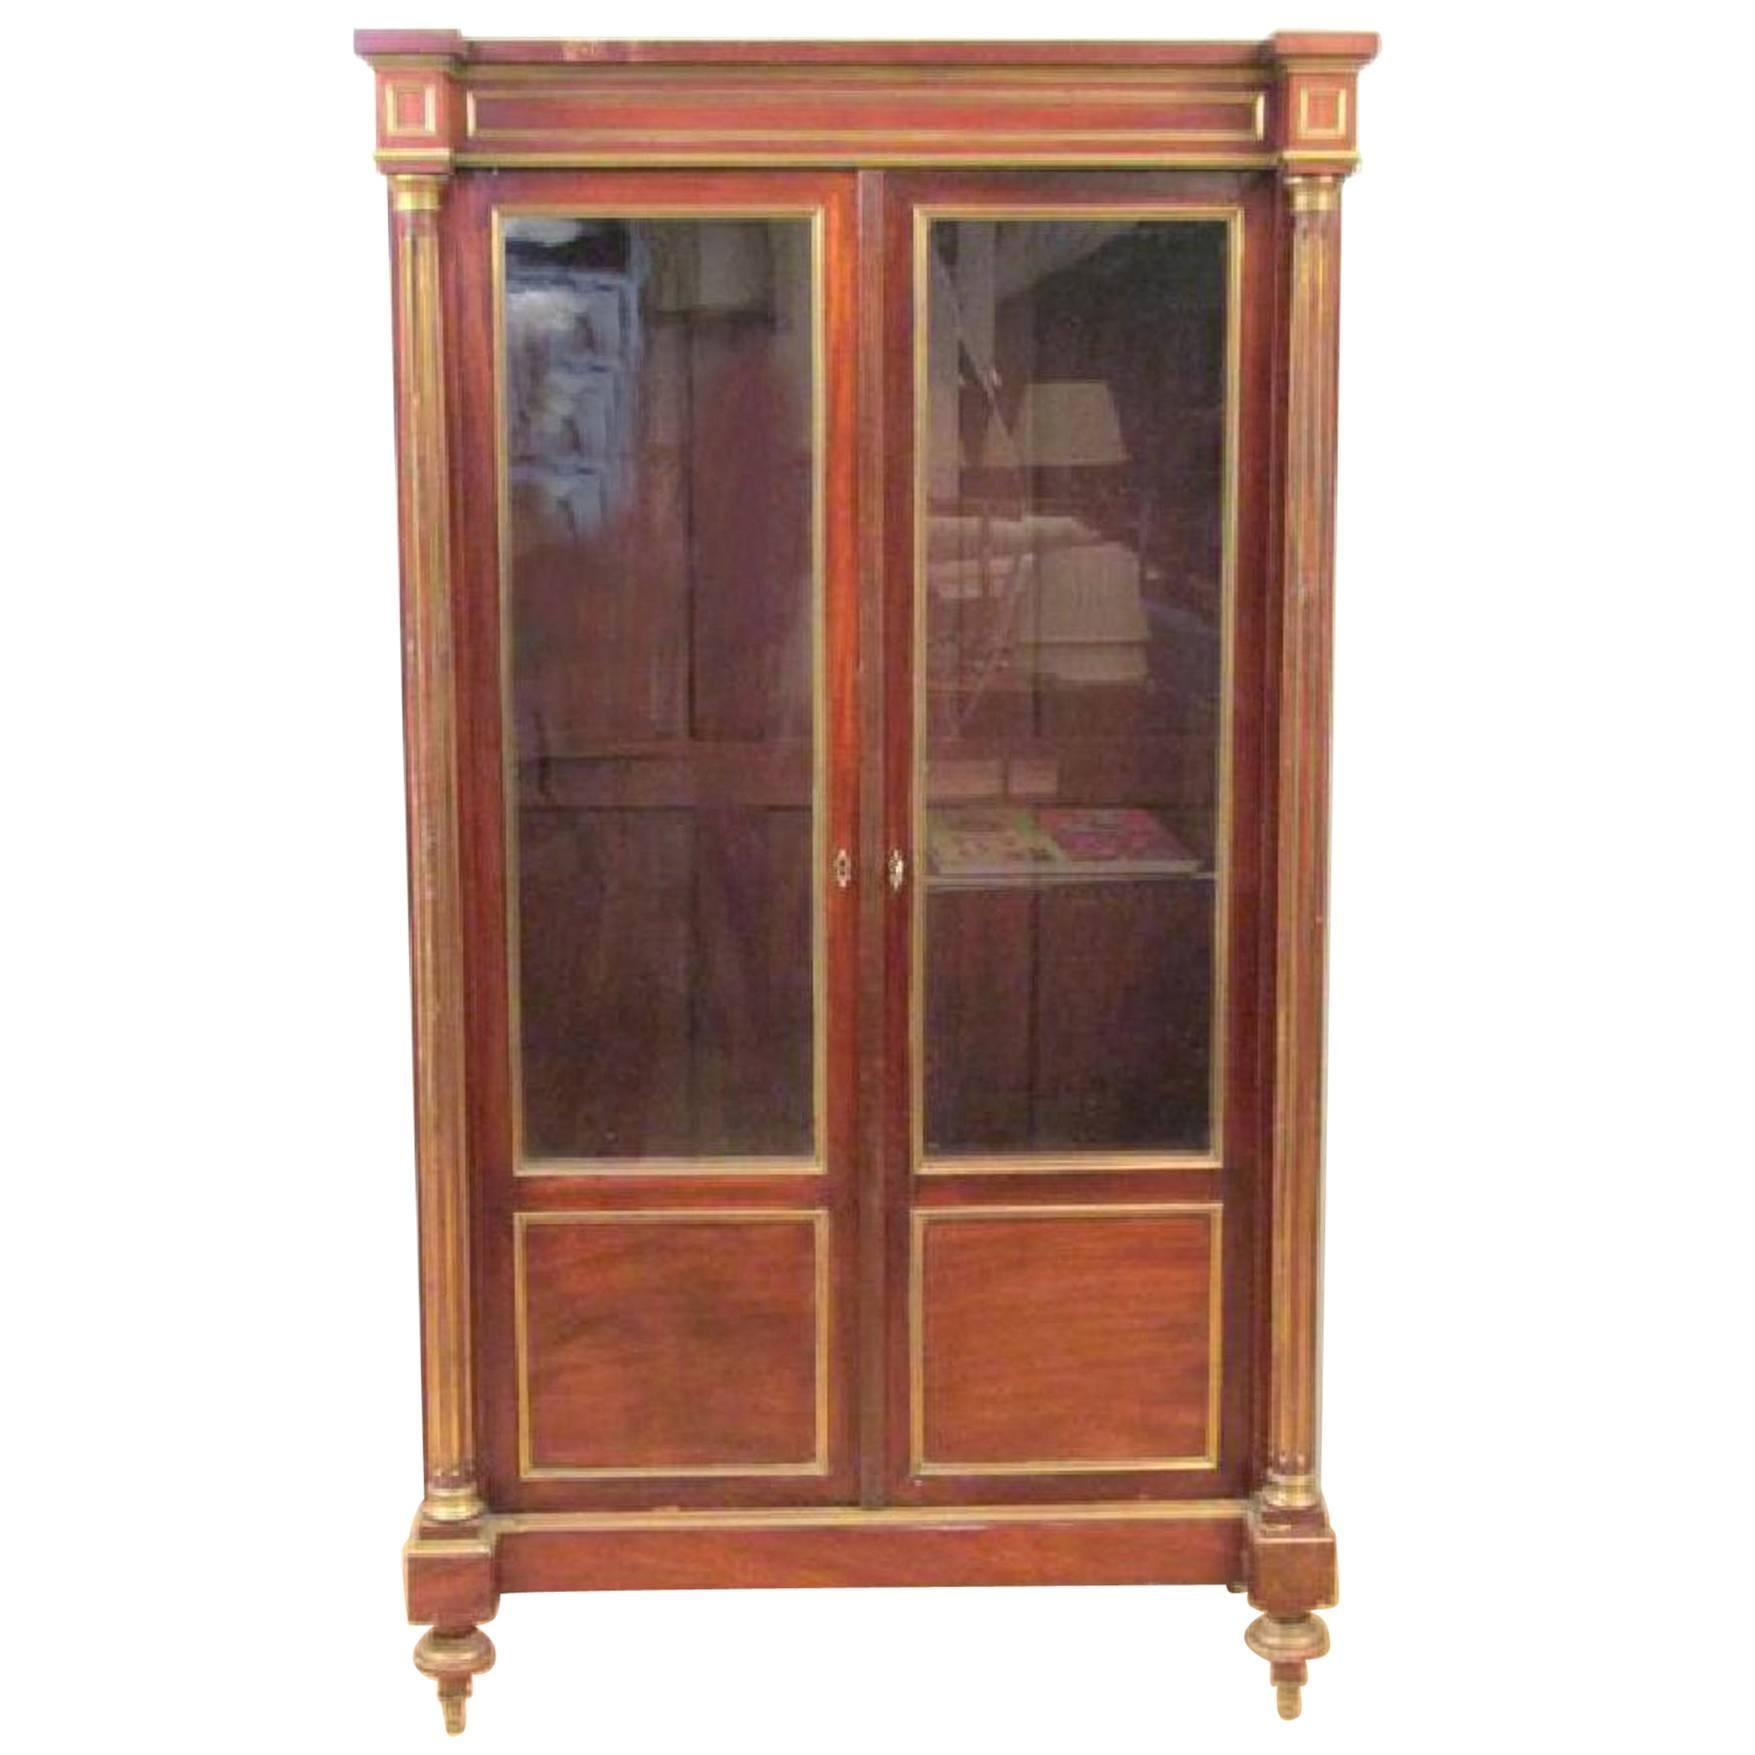 19th Century Russian or French Neoclassical Cabinet or Bibliotheque